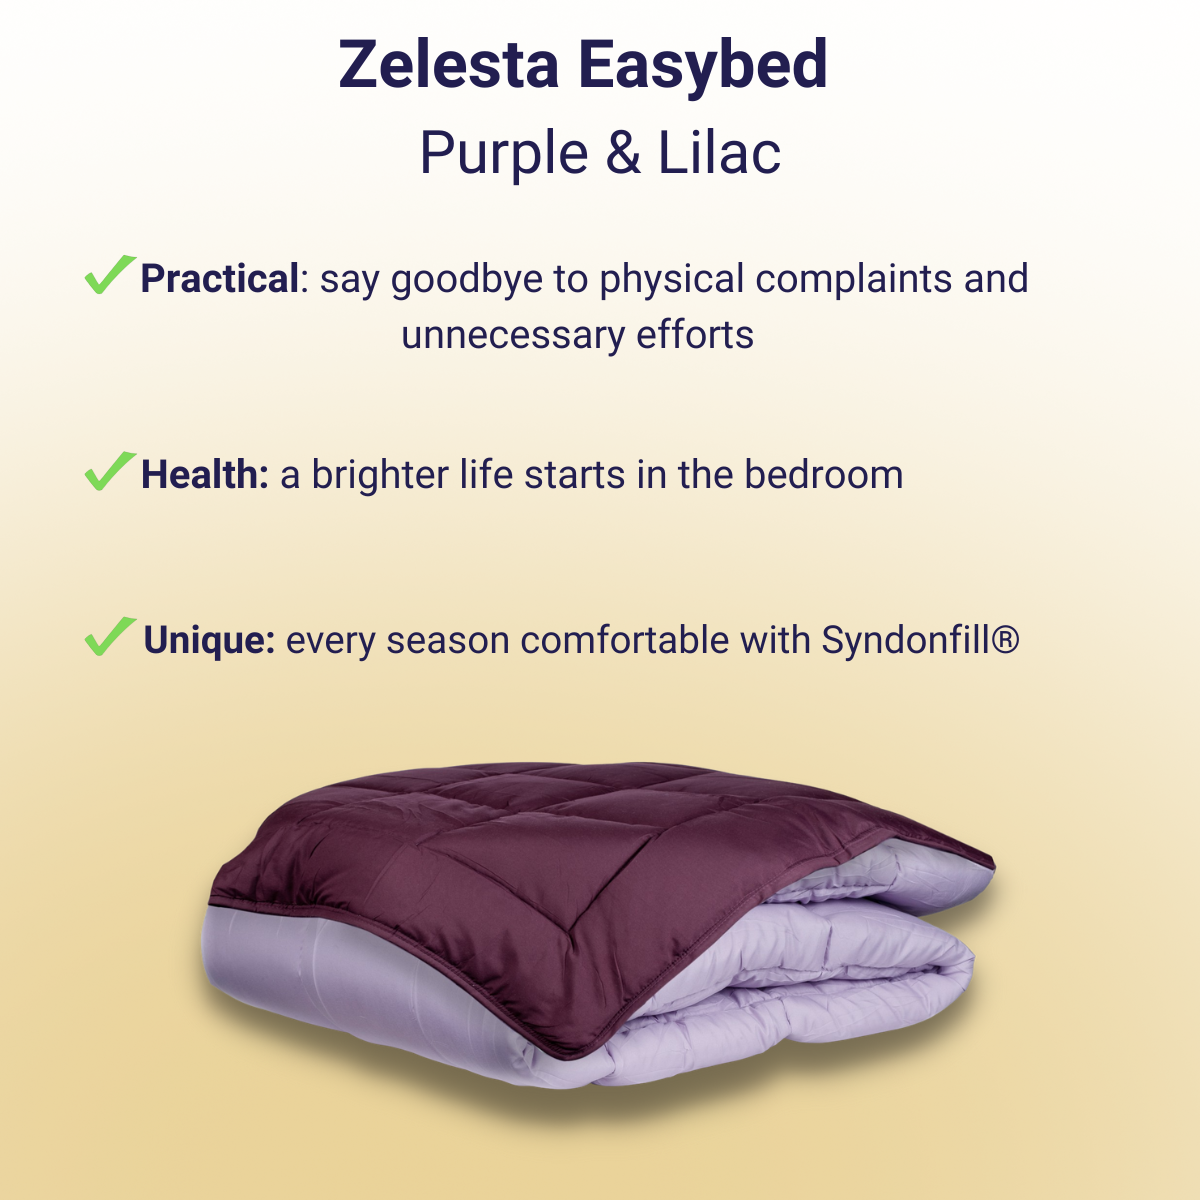 Zelesta-Easybed - Purple-Lilac-washable-quilt-2-in-1-without-cover-benefits